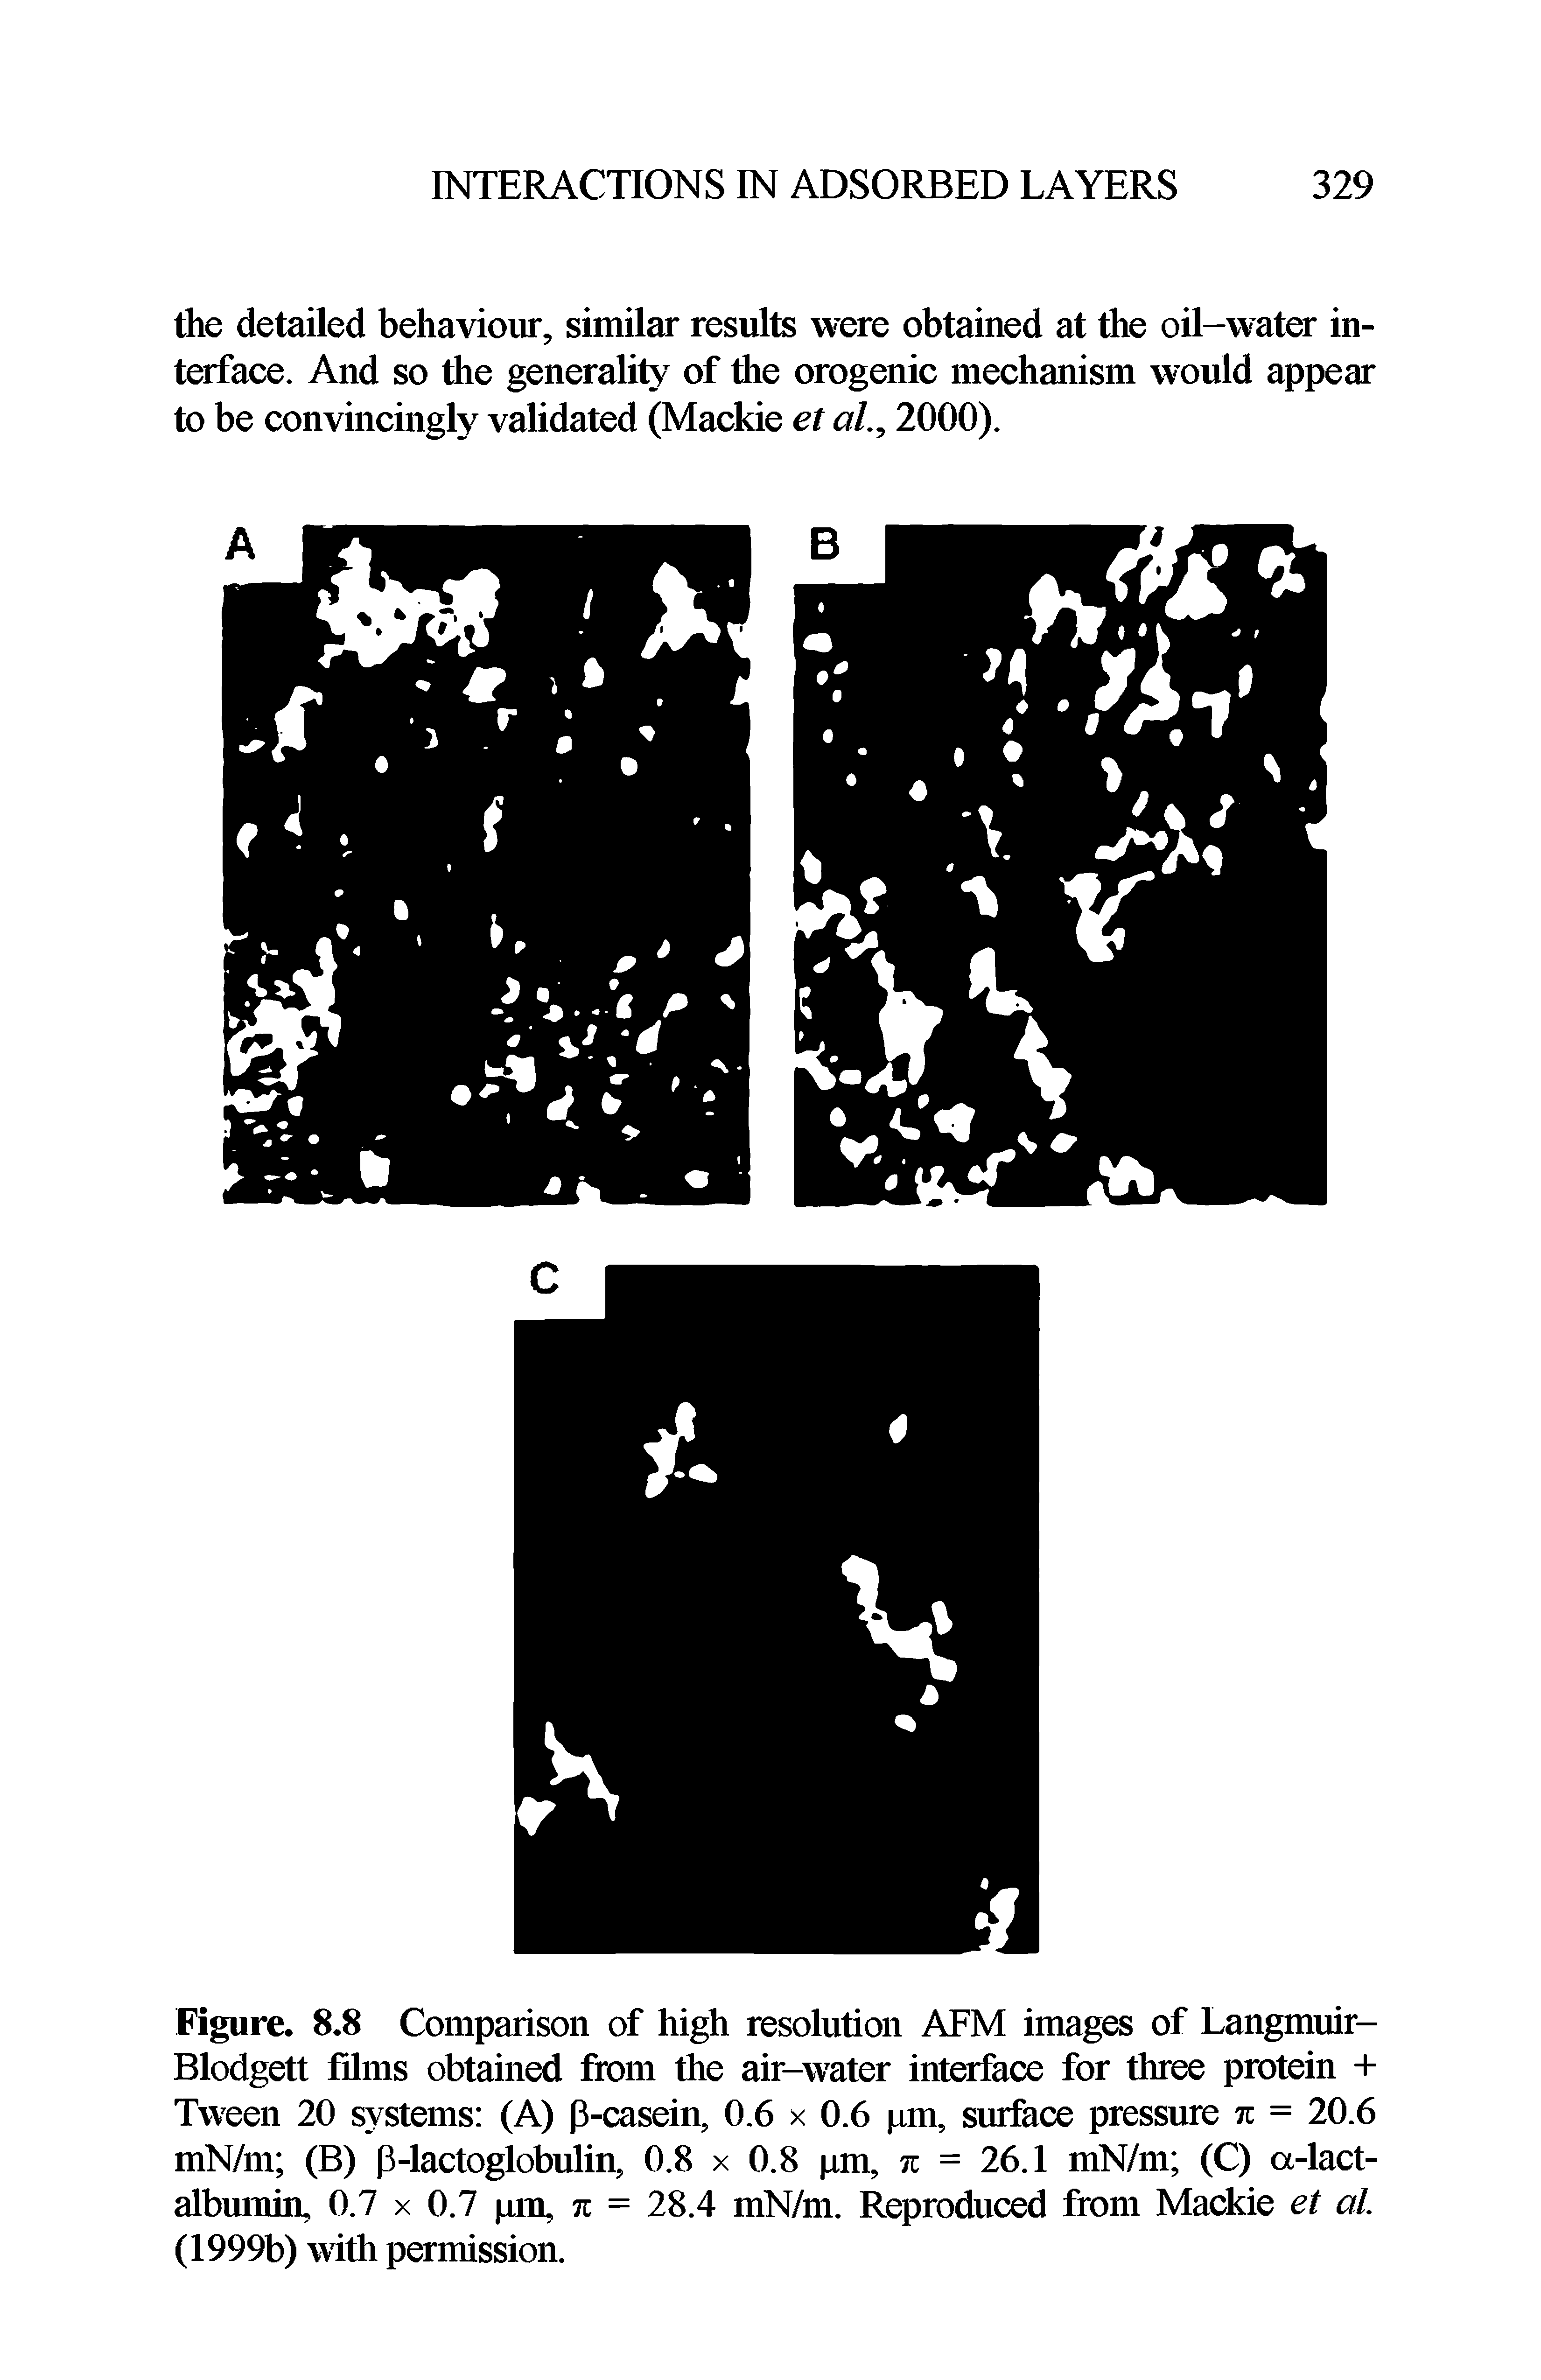 Figure. 8.8 Comparison of high resolution AFM images of Langmuir-Blodgett films obtained from the air-water interface for three protein + Tween 20 systems (A) p-casein, 0.6 x 0.6 pm, surface pressure % = 20.6 mN/m (B) p-lactoglobulin, 0.8 x 0.8 pm, % = 26.1 mN/m (C) a-lact-albumin, 0.7 x 0.7 pm, % = 28.4 mN/m. Reproduced from Mackie et al (1999b) with permission.